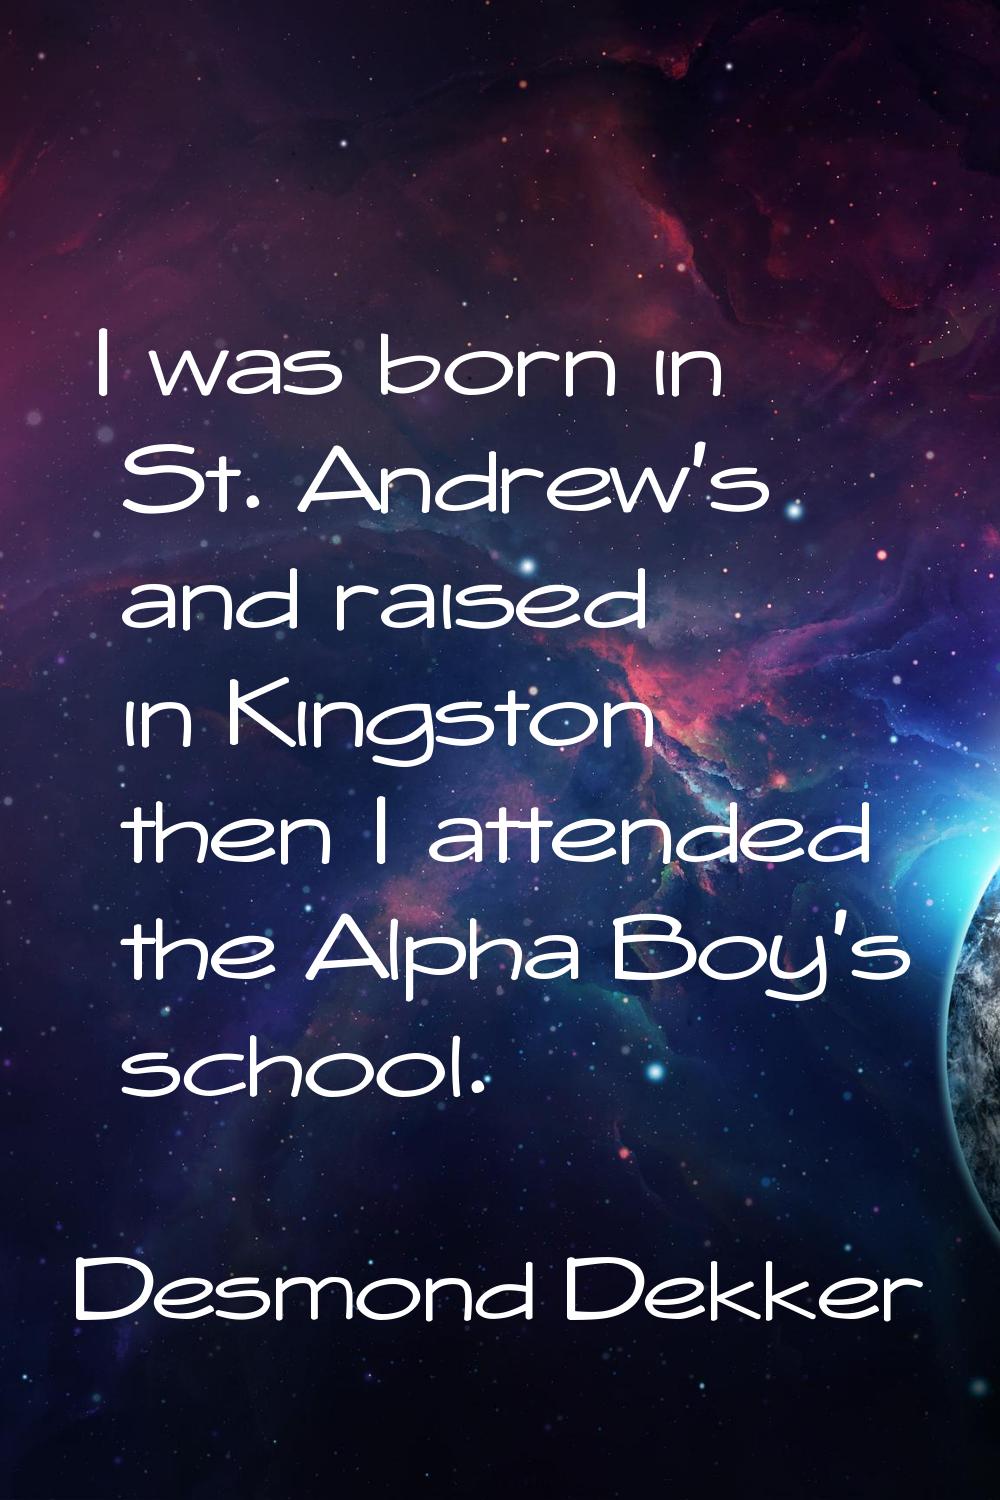 I was born in St. Andrew's and raised in Kingston then I attended the Alpha Boy's school.